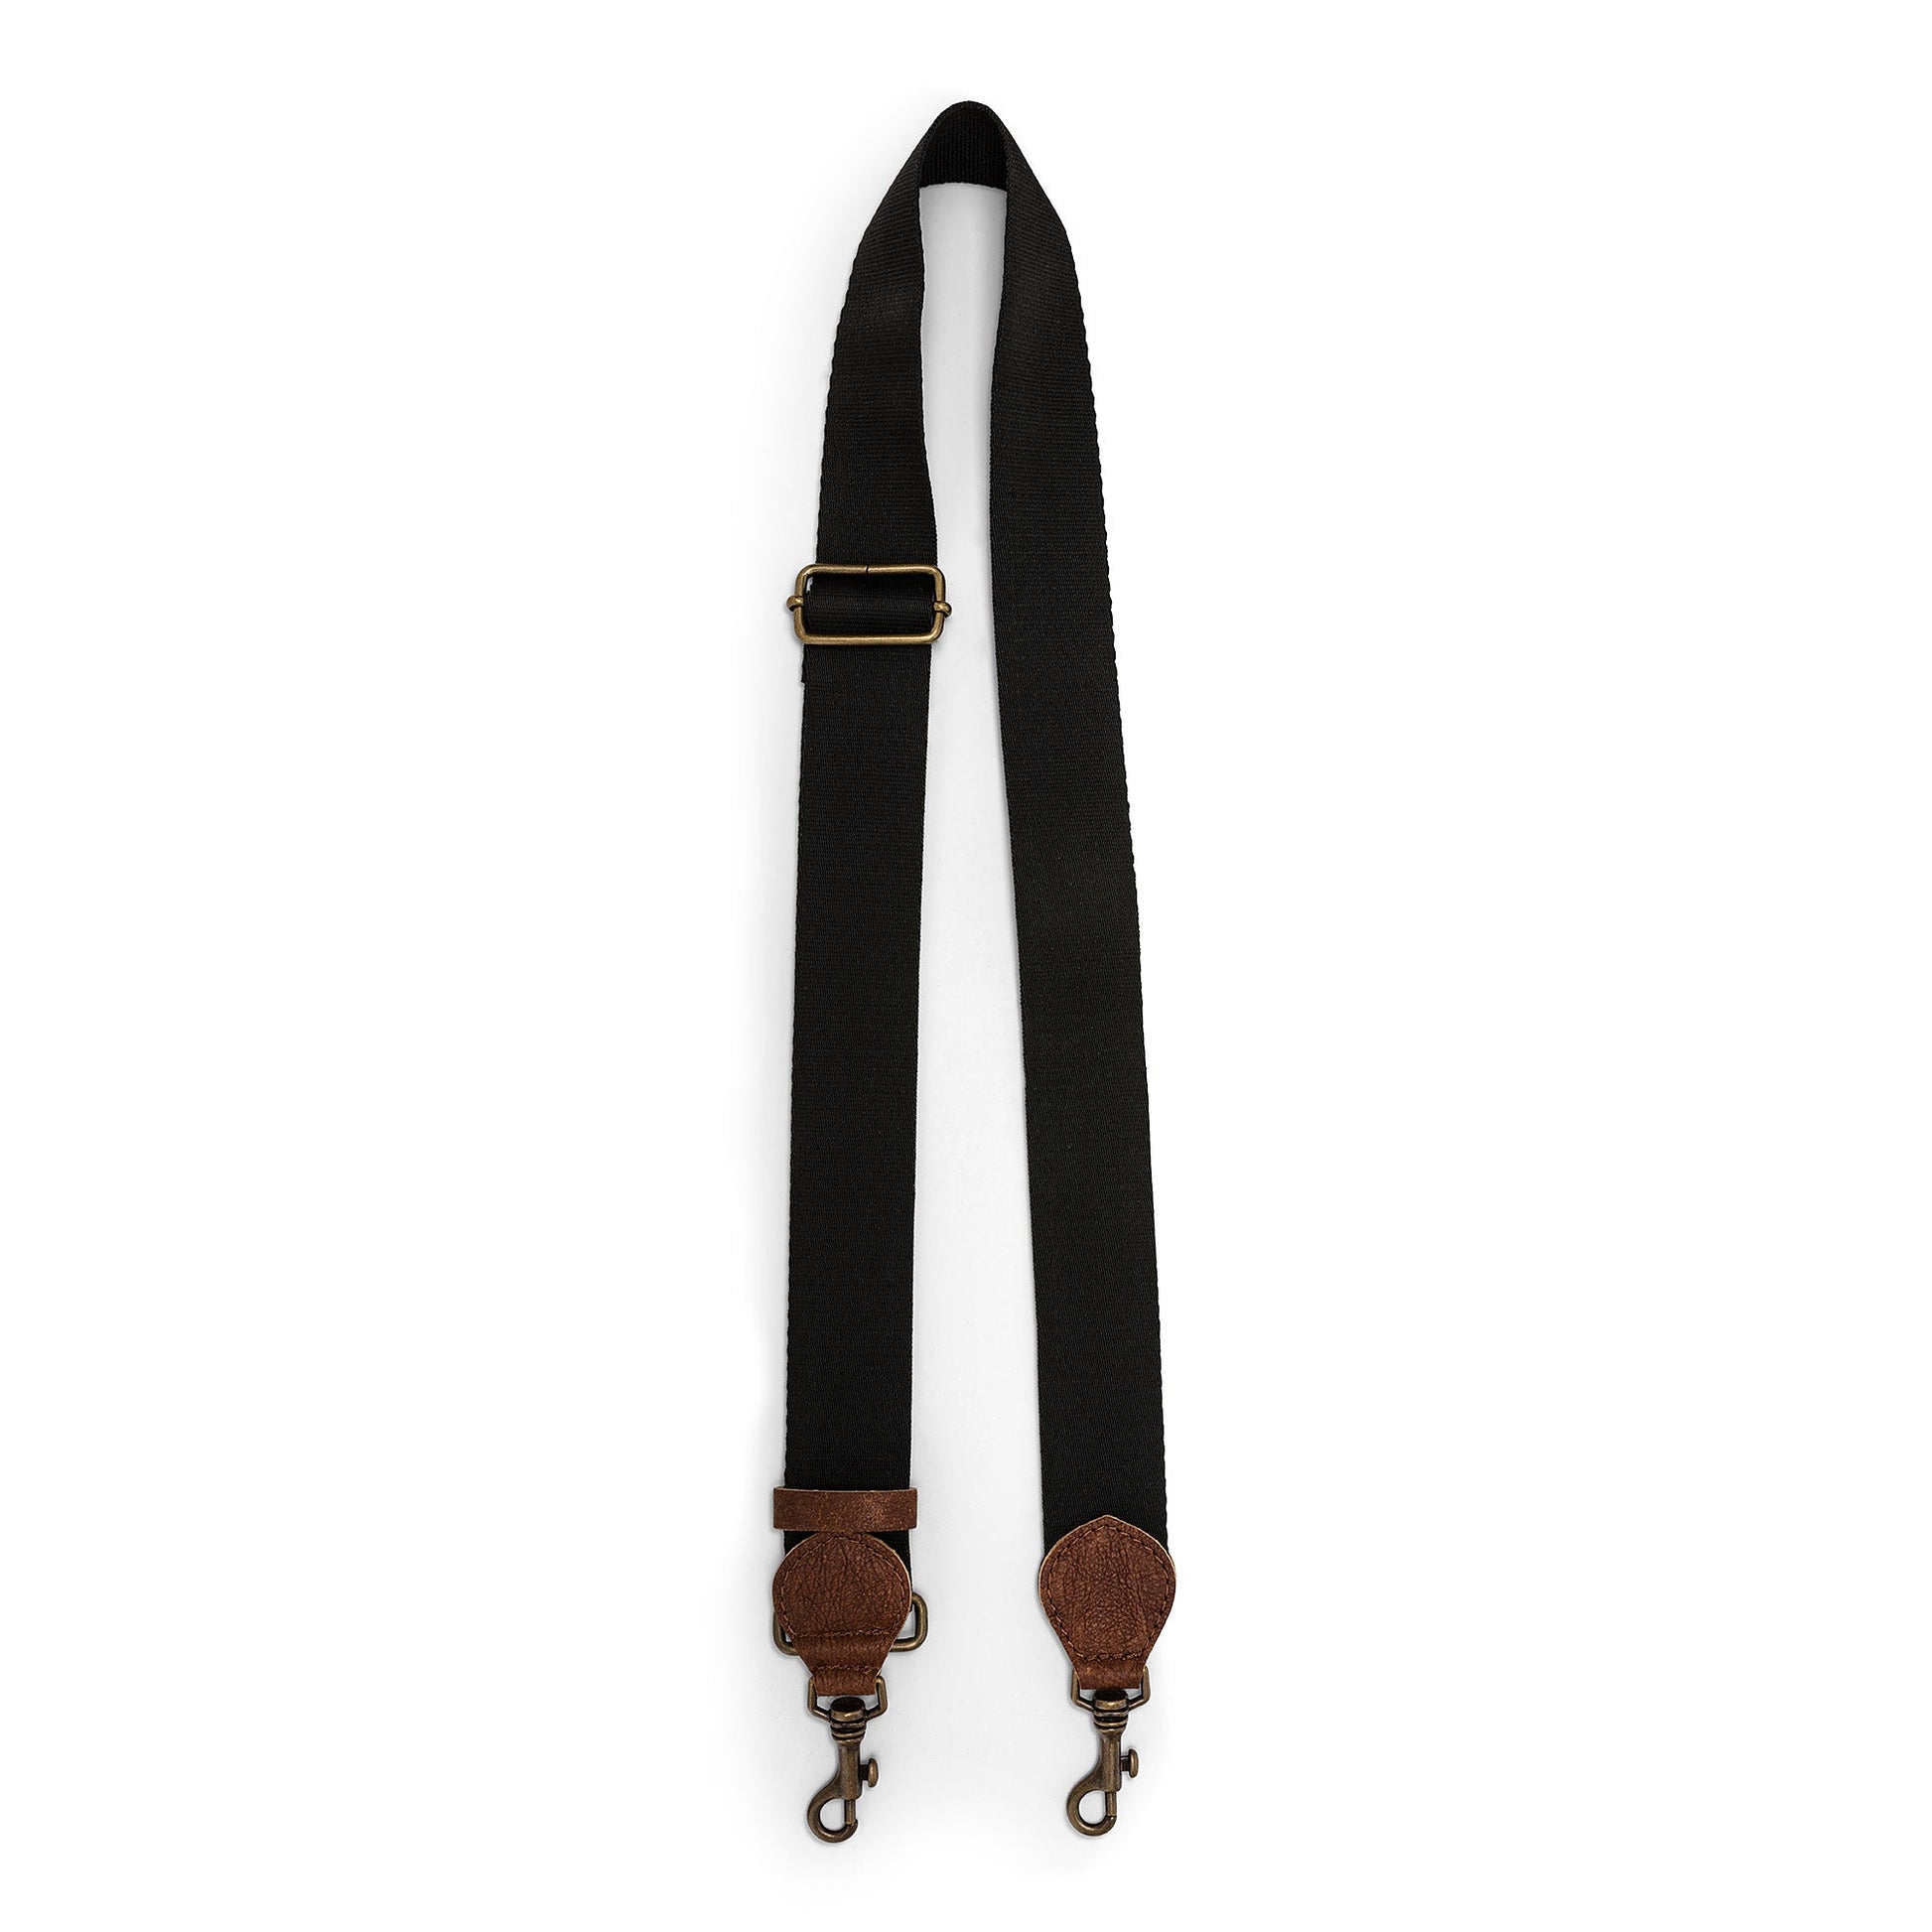 A black bag strap is shown. The strap shows a brass adjuster, washable paper details and metal retractable fasteners.